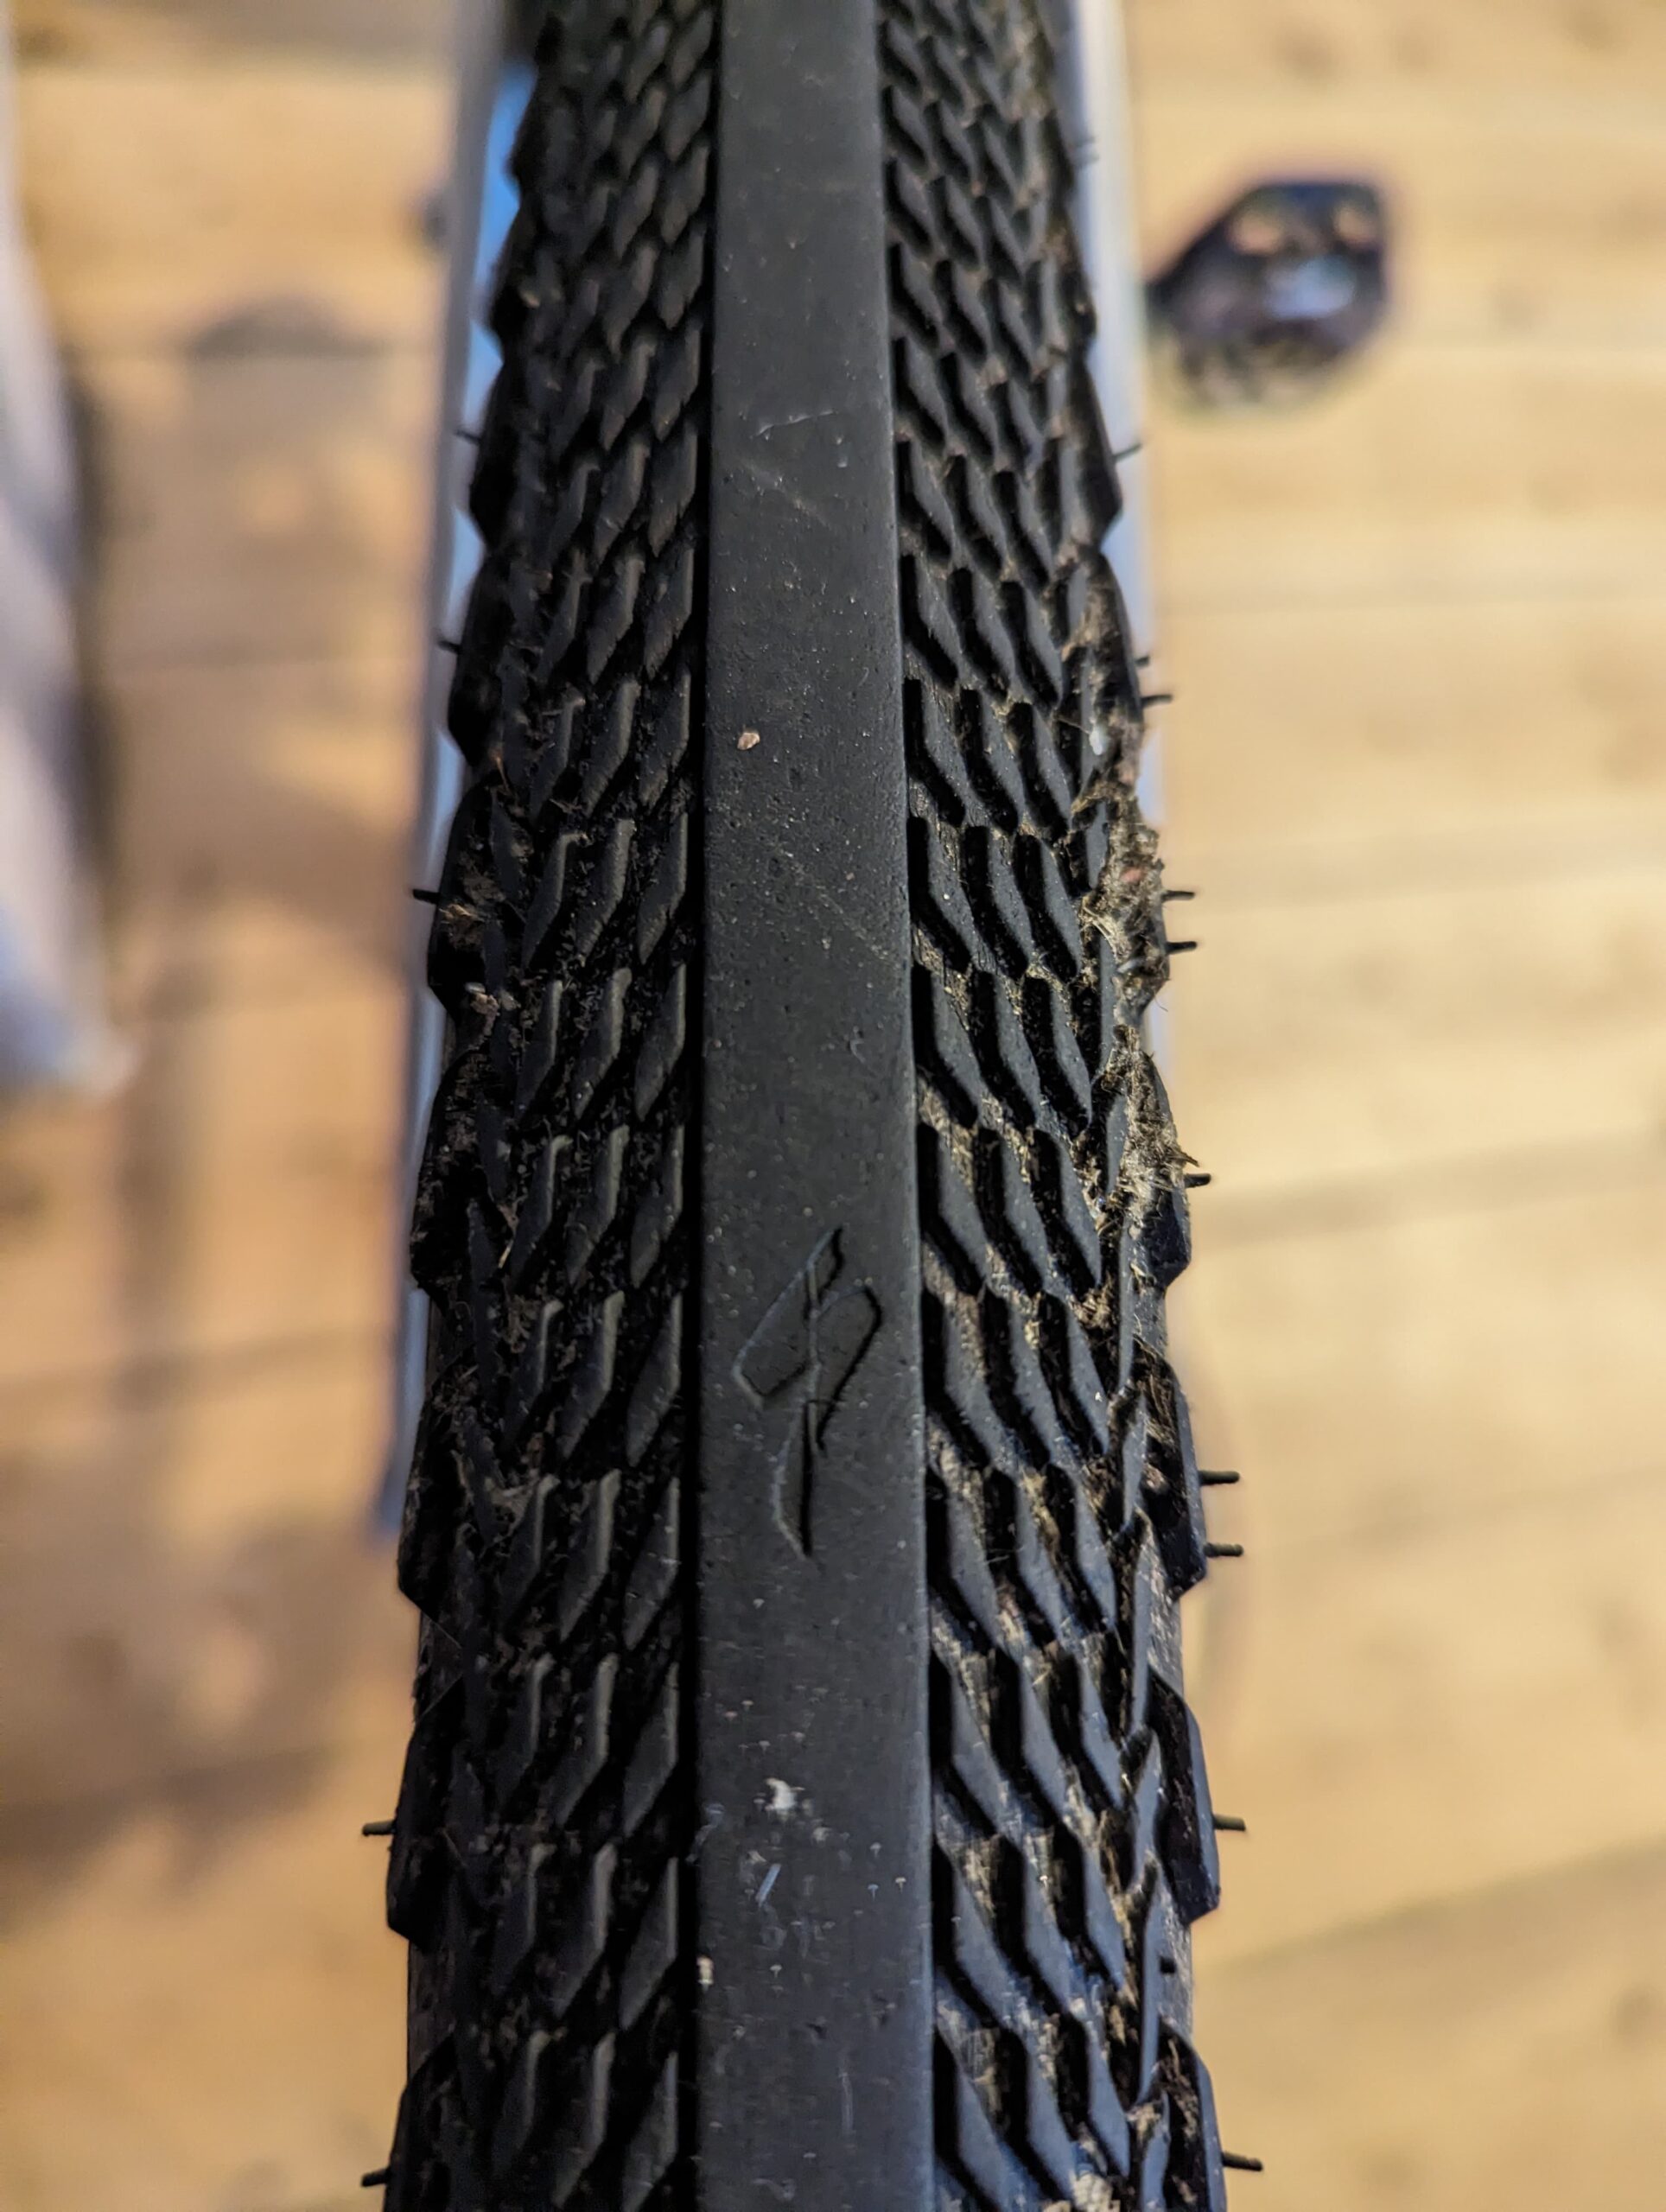 pathfinder pro close up of their centre tread pattern